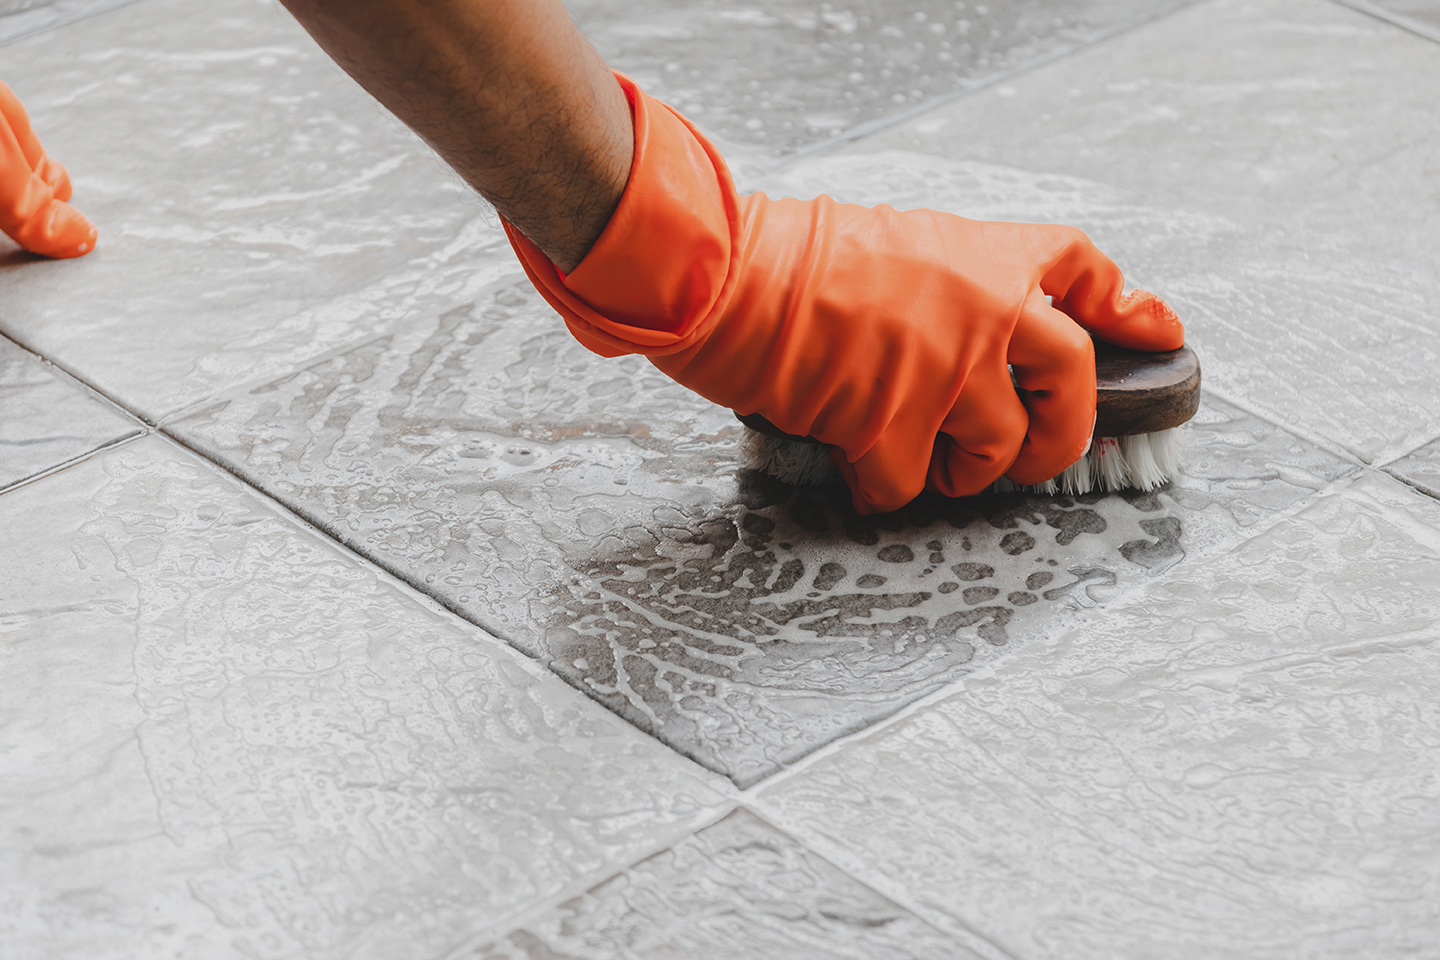 How To Clean Your Tiles And Grout And Keep Them Clean?